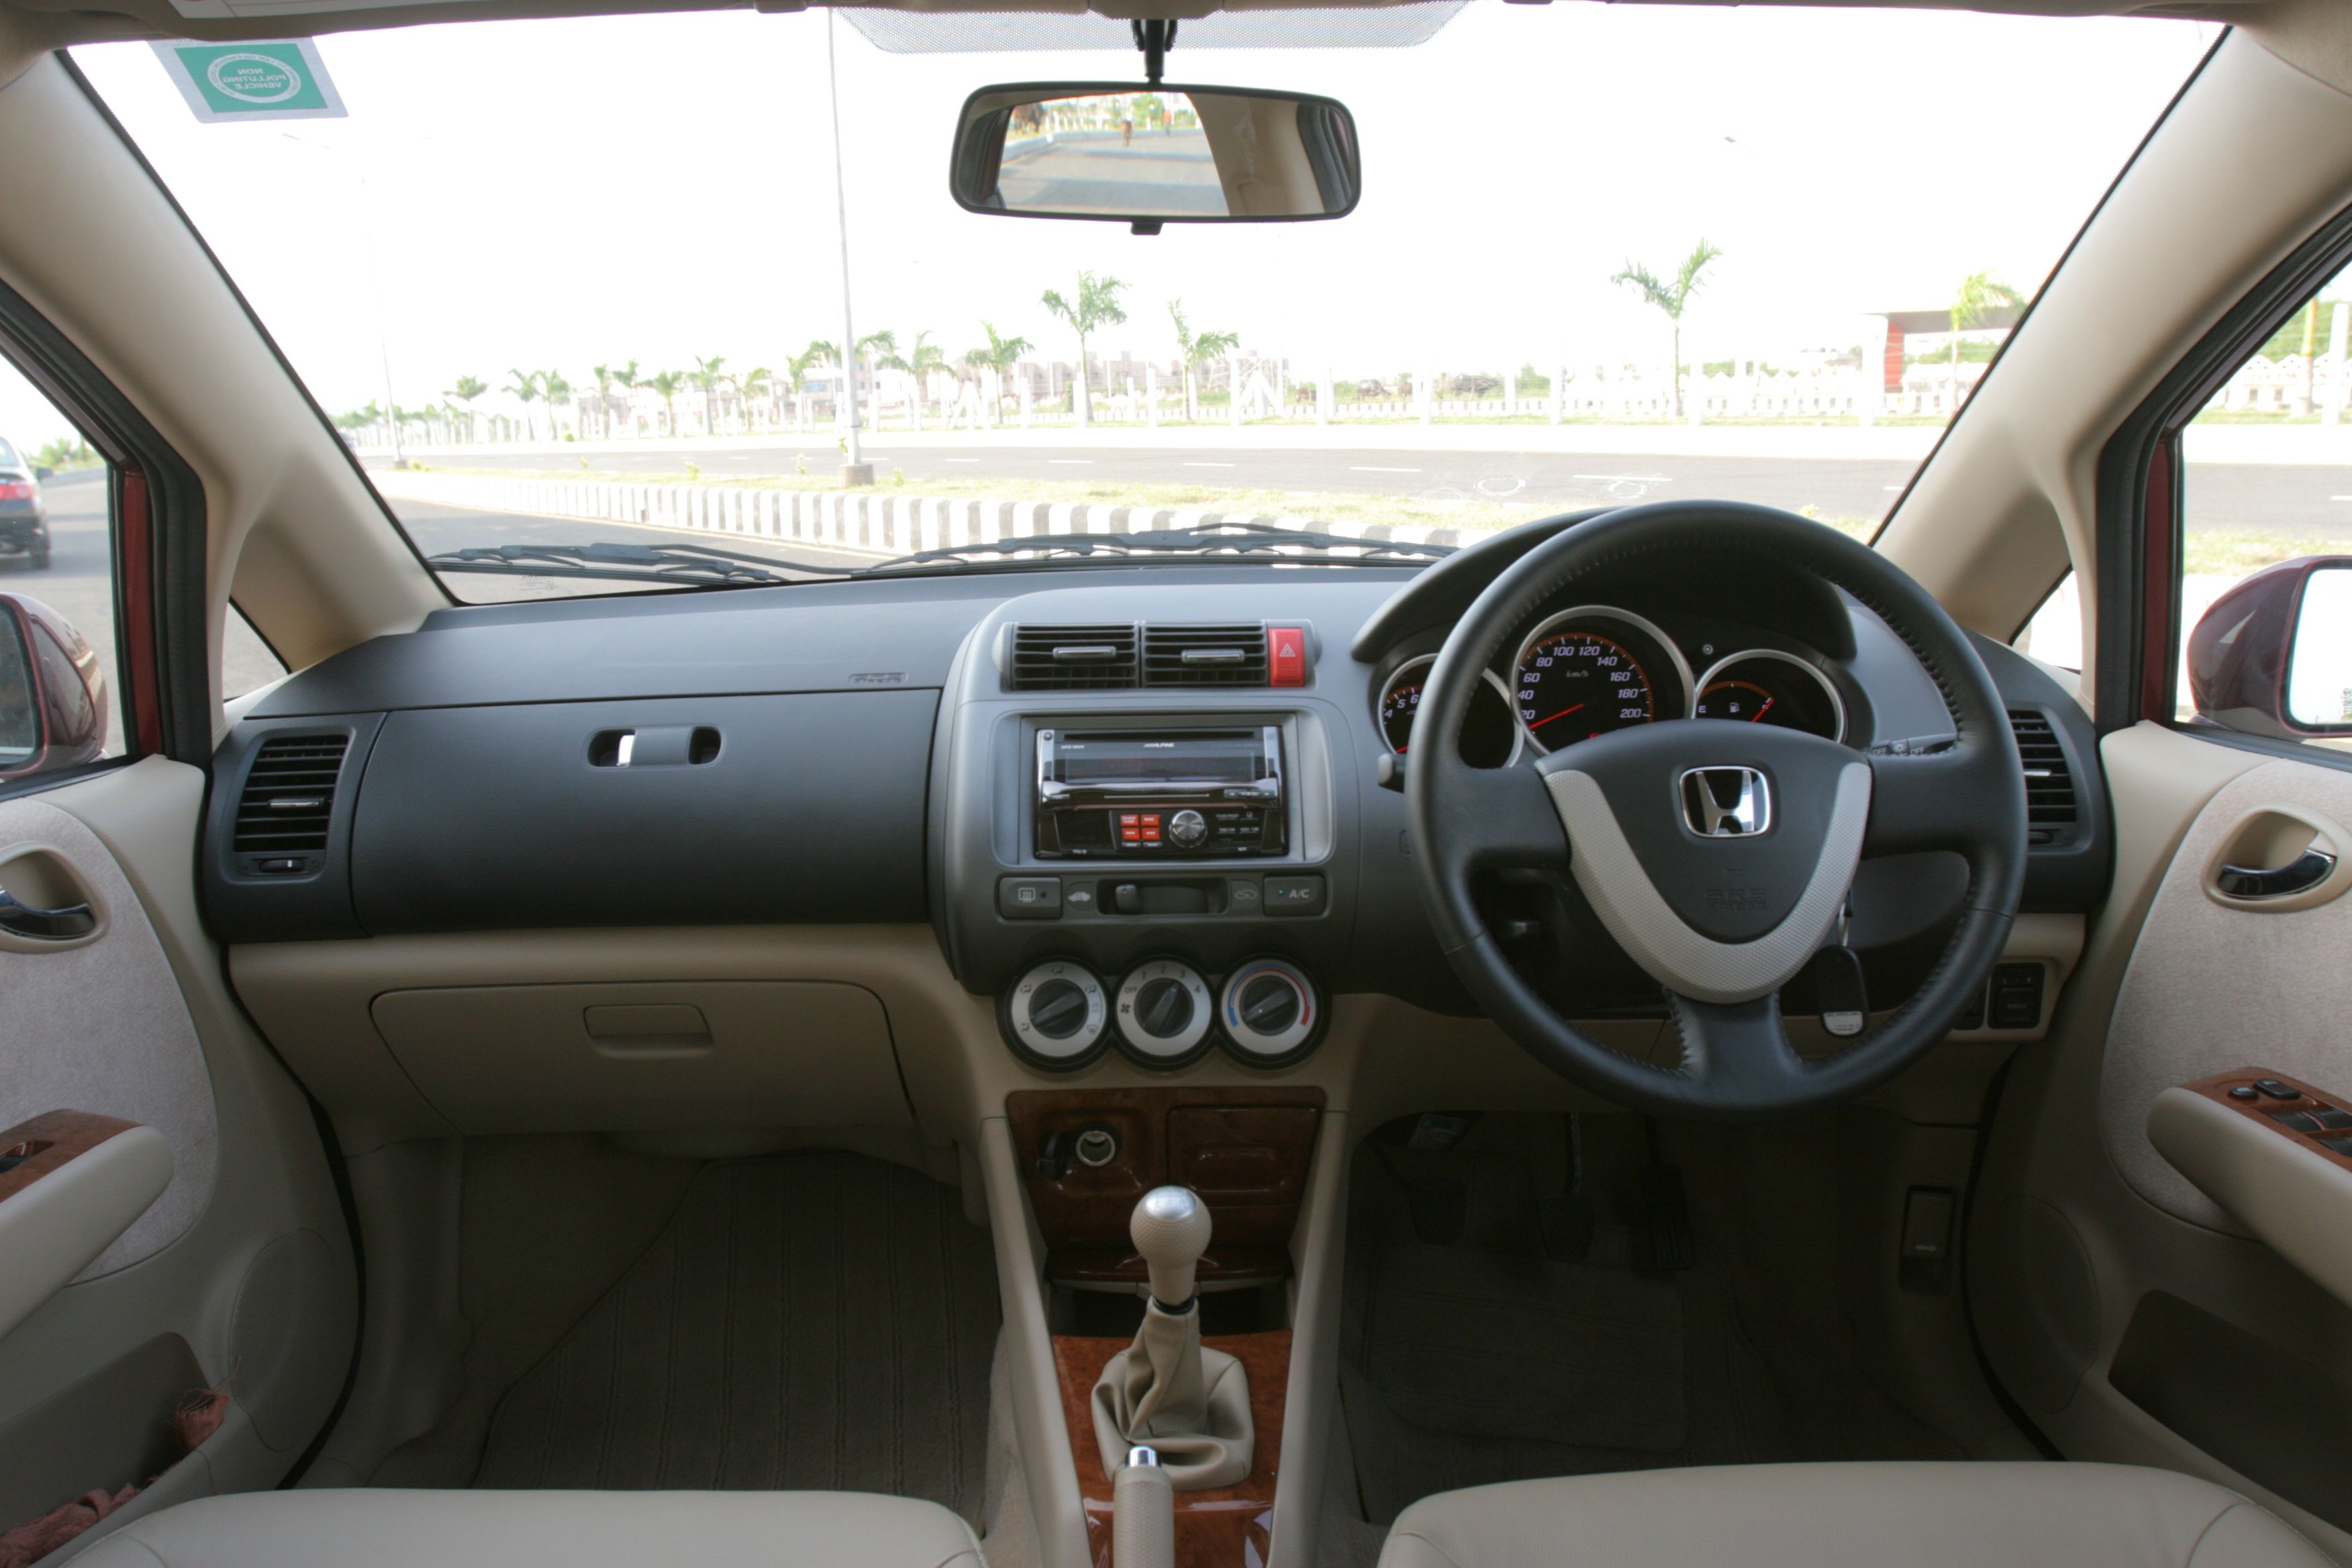 Honda City Zx Exi Price Incl Gst In India Ratings